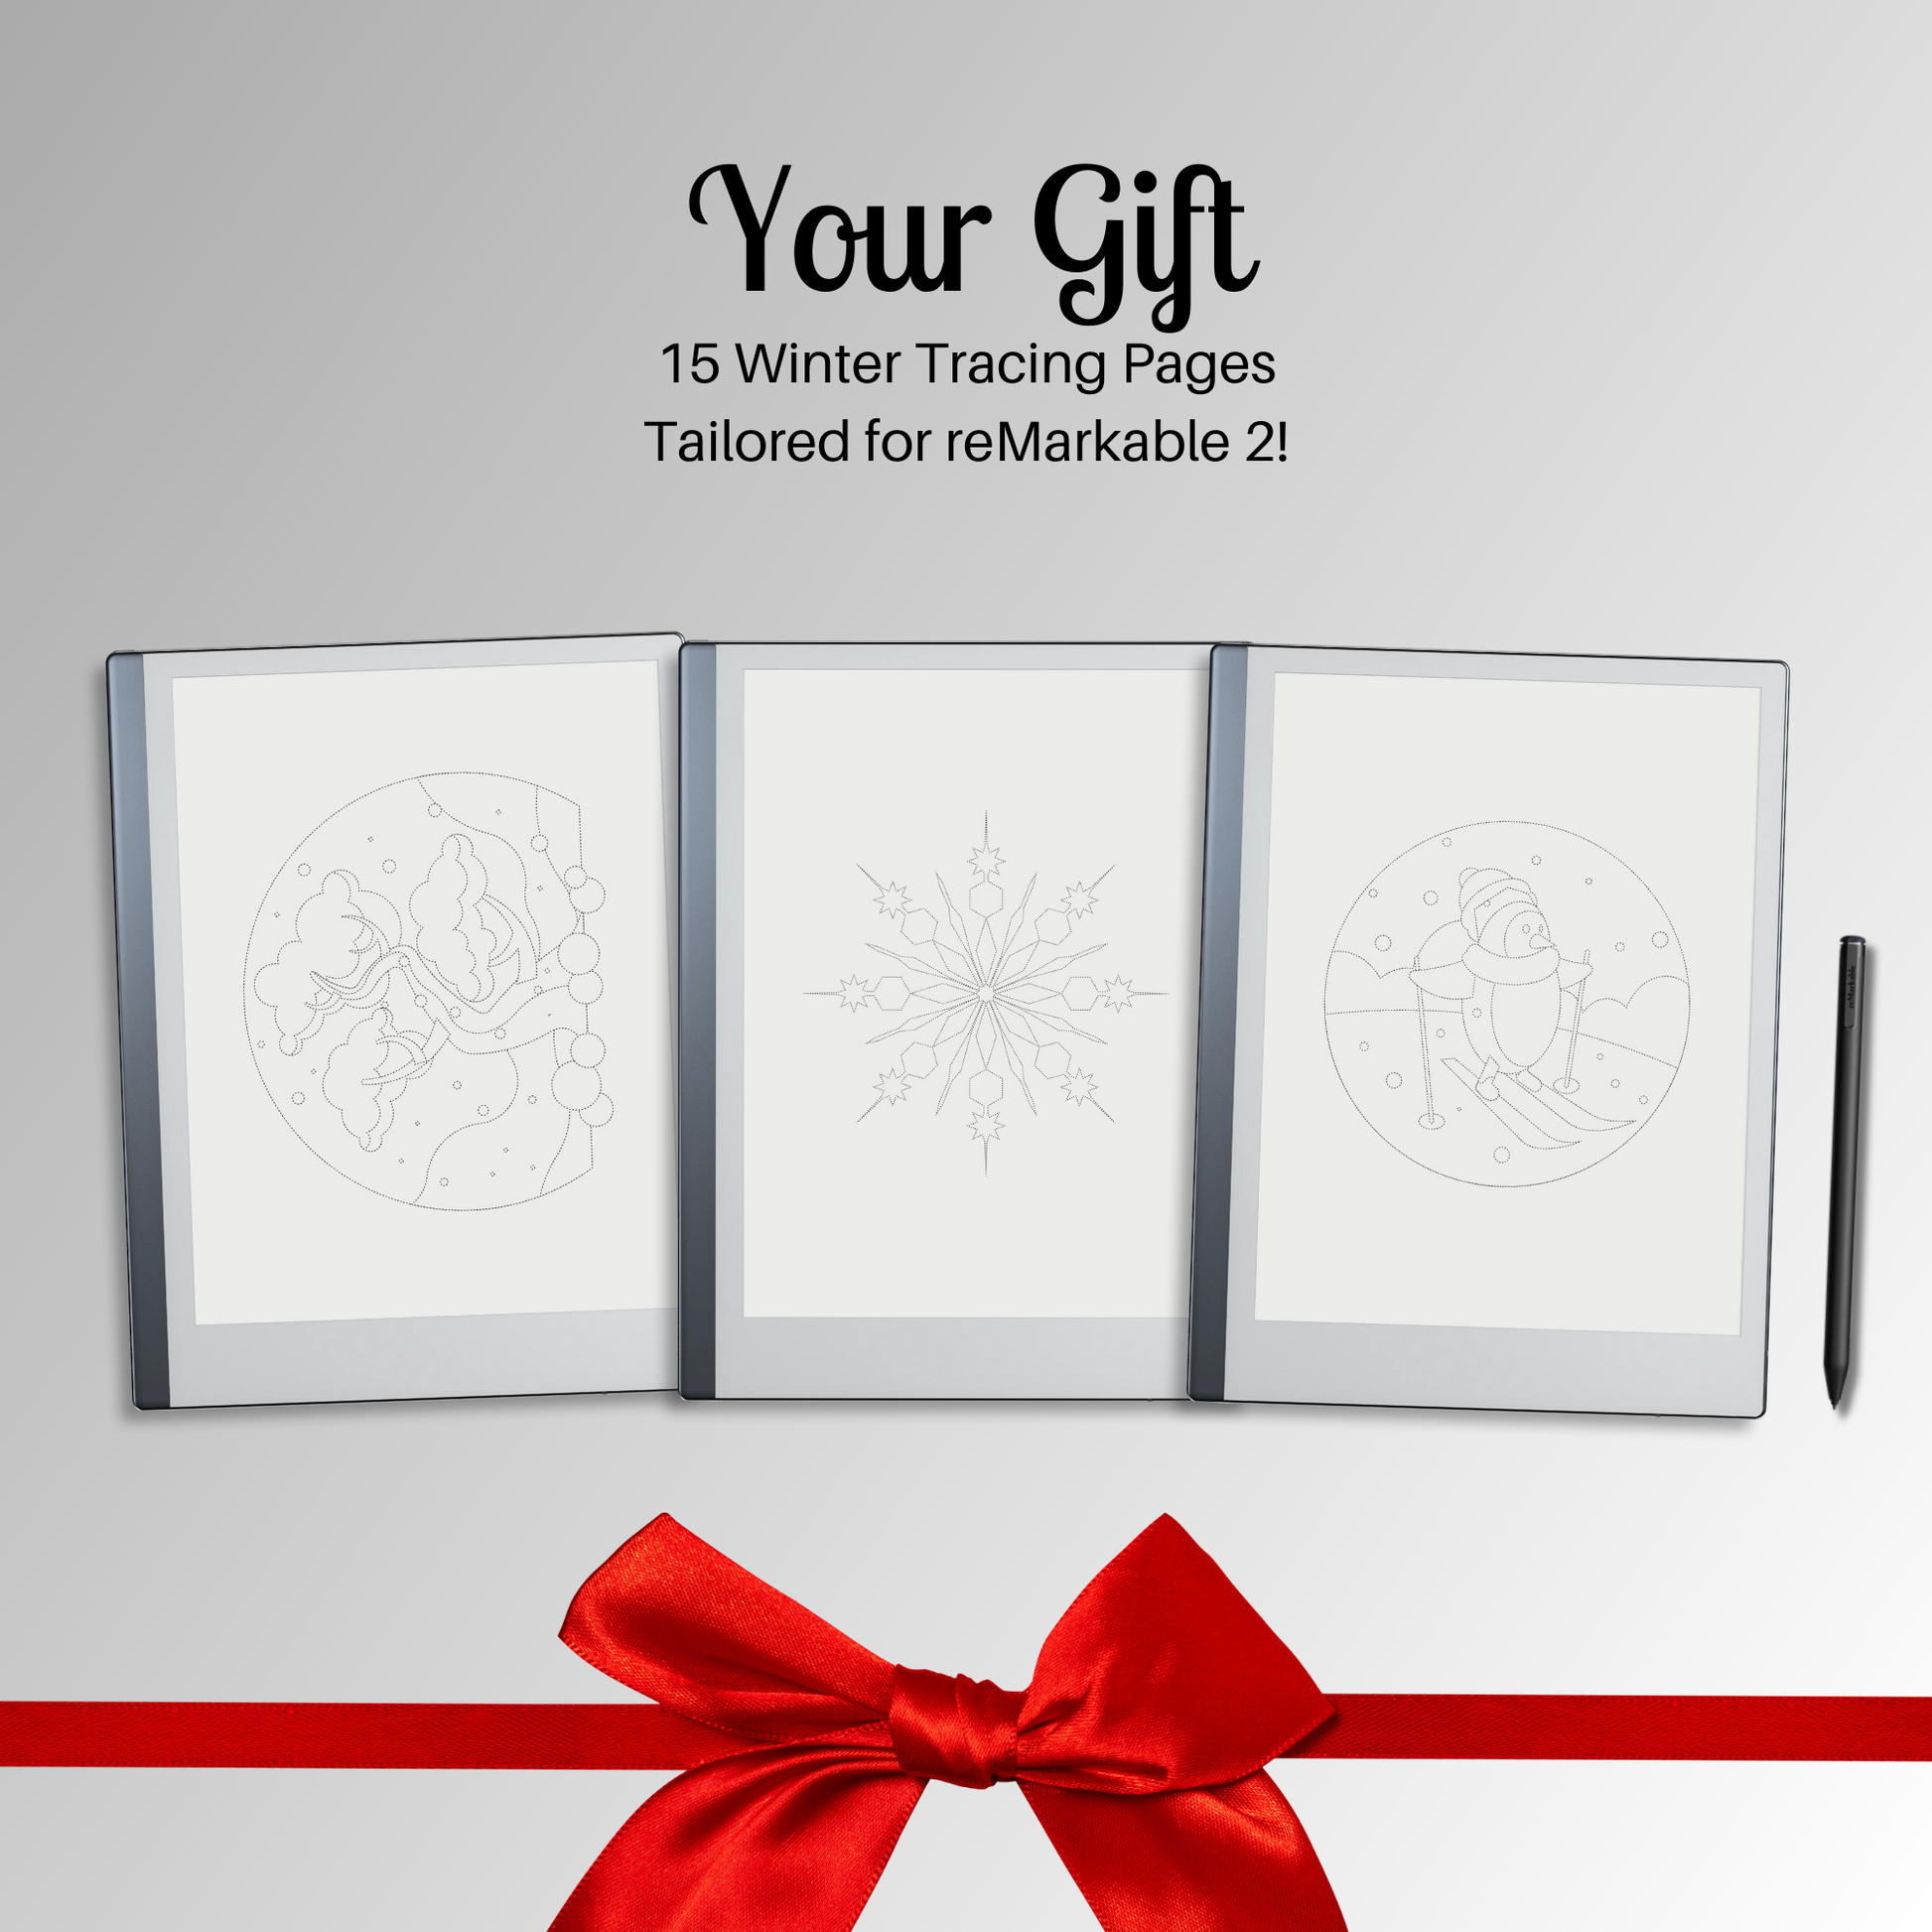 Remarkable 2 Tracing Pages for Christmas as Gift